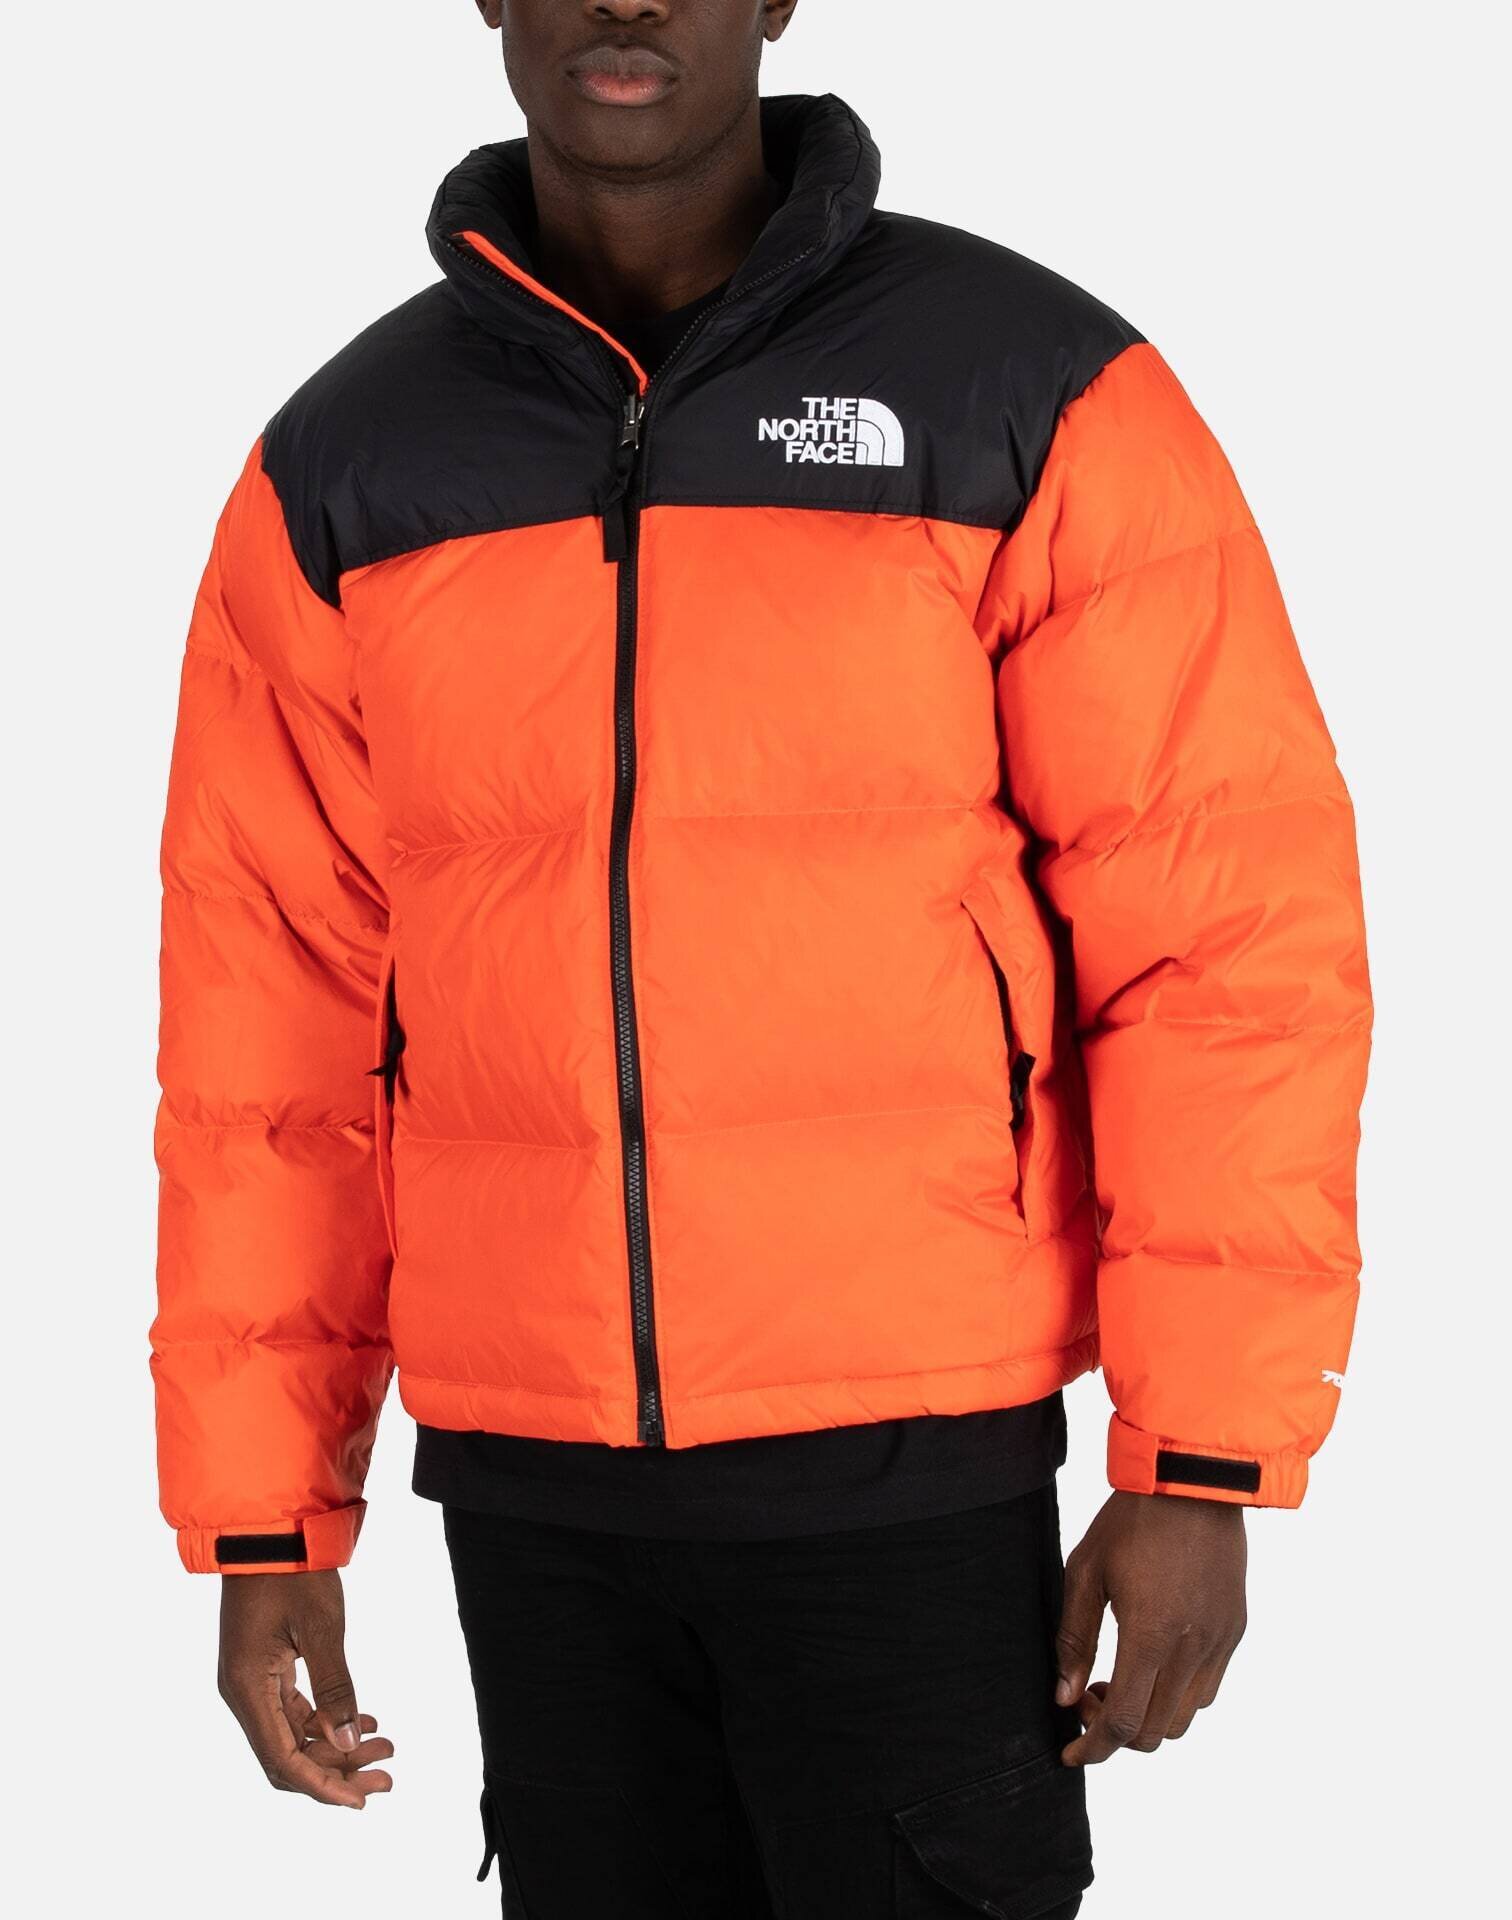 The North Face 1996 Retro Nupste Jacket 